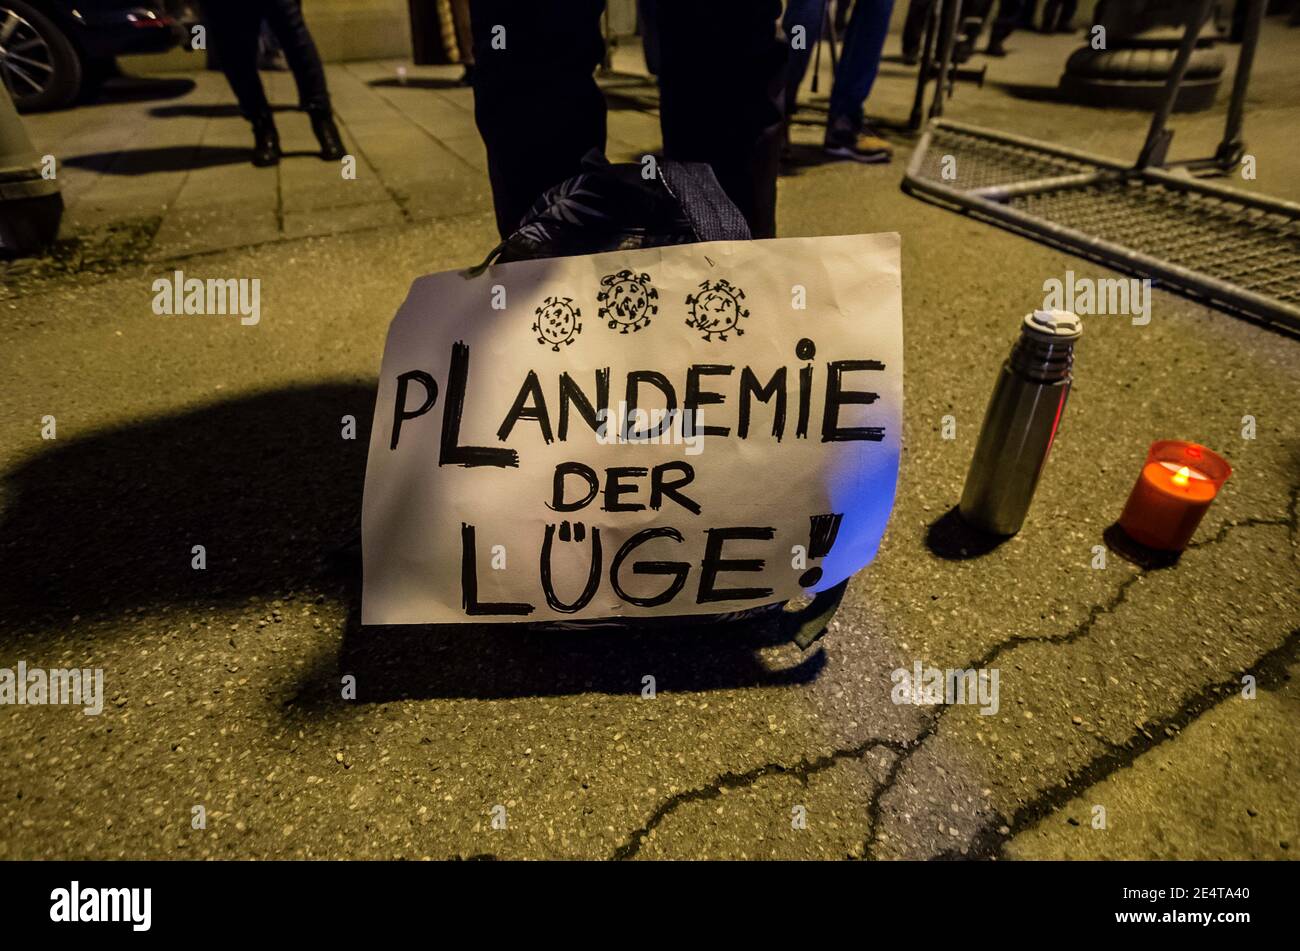 Munich, Bavaria, Germany. 24th Jan, 2021. ''Plandemie'' indicating the belief Corona is a hoax. On the heels of a court win with the Verwaltungsgerichtshof, Markus Haintz of the Querdenken group organized an anti-mask, anti-anti-Corona measure demonstration in front of the Verwaltungsgerichtshof in Munich, Germany. Approximately 250 were in attendance and displayed a jump in radicalization and propensity for violence against media representatives not seen prior to the end of the Trump era. At one point, media representatives were swarmed, physically attacked and prevented from working as Stock Photo